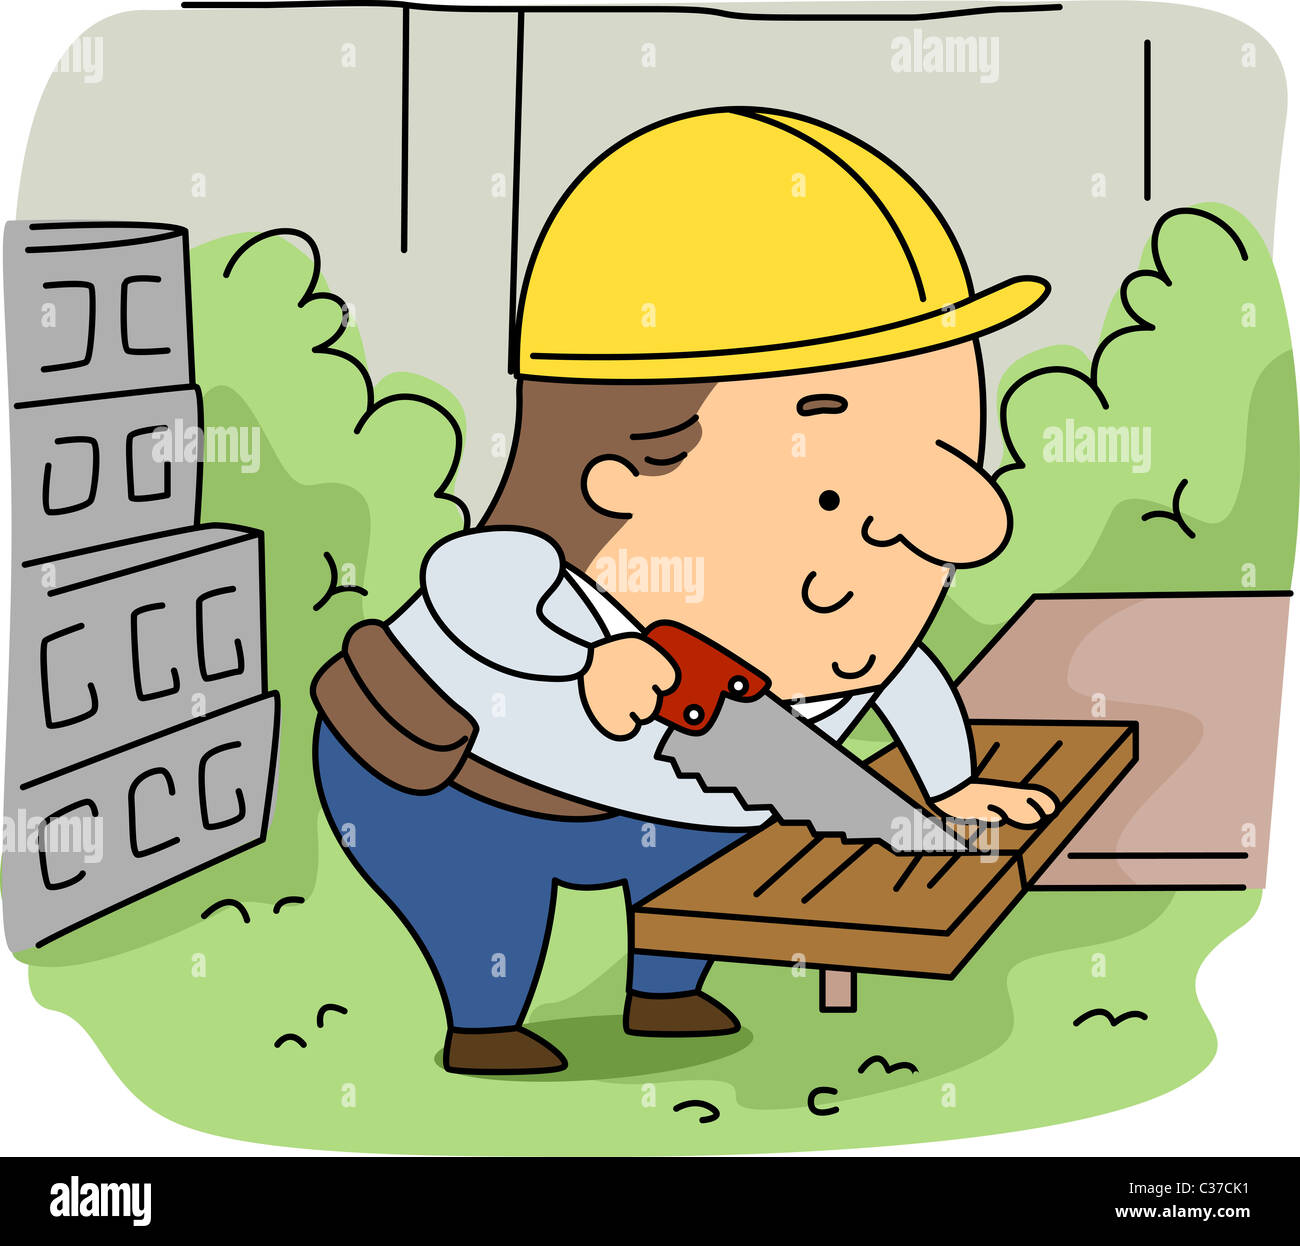 Illustration of a Woodcutter at Work Stock Photo